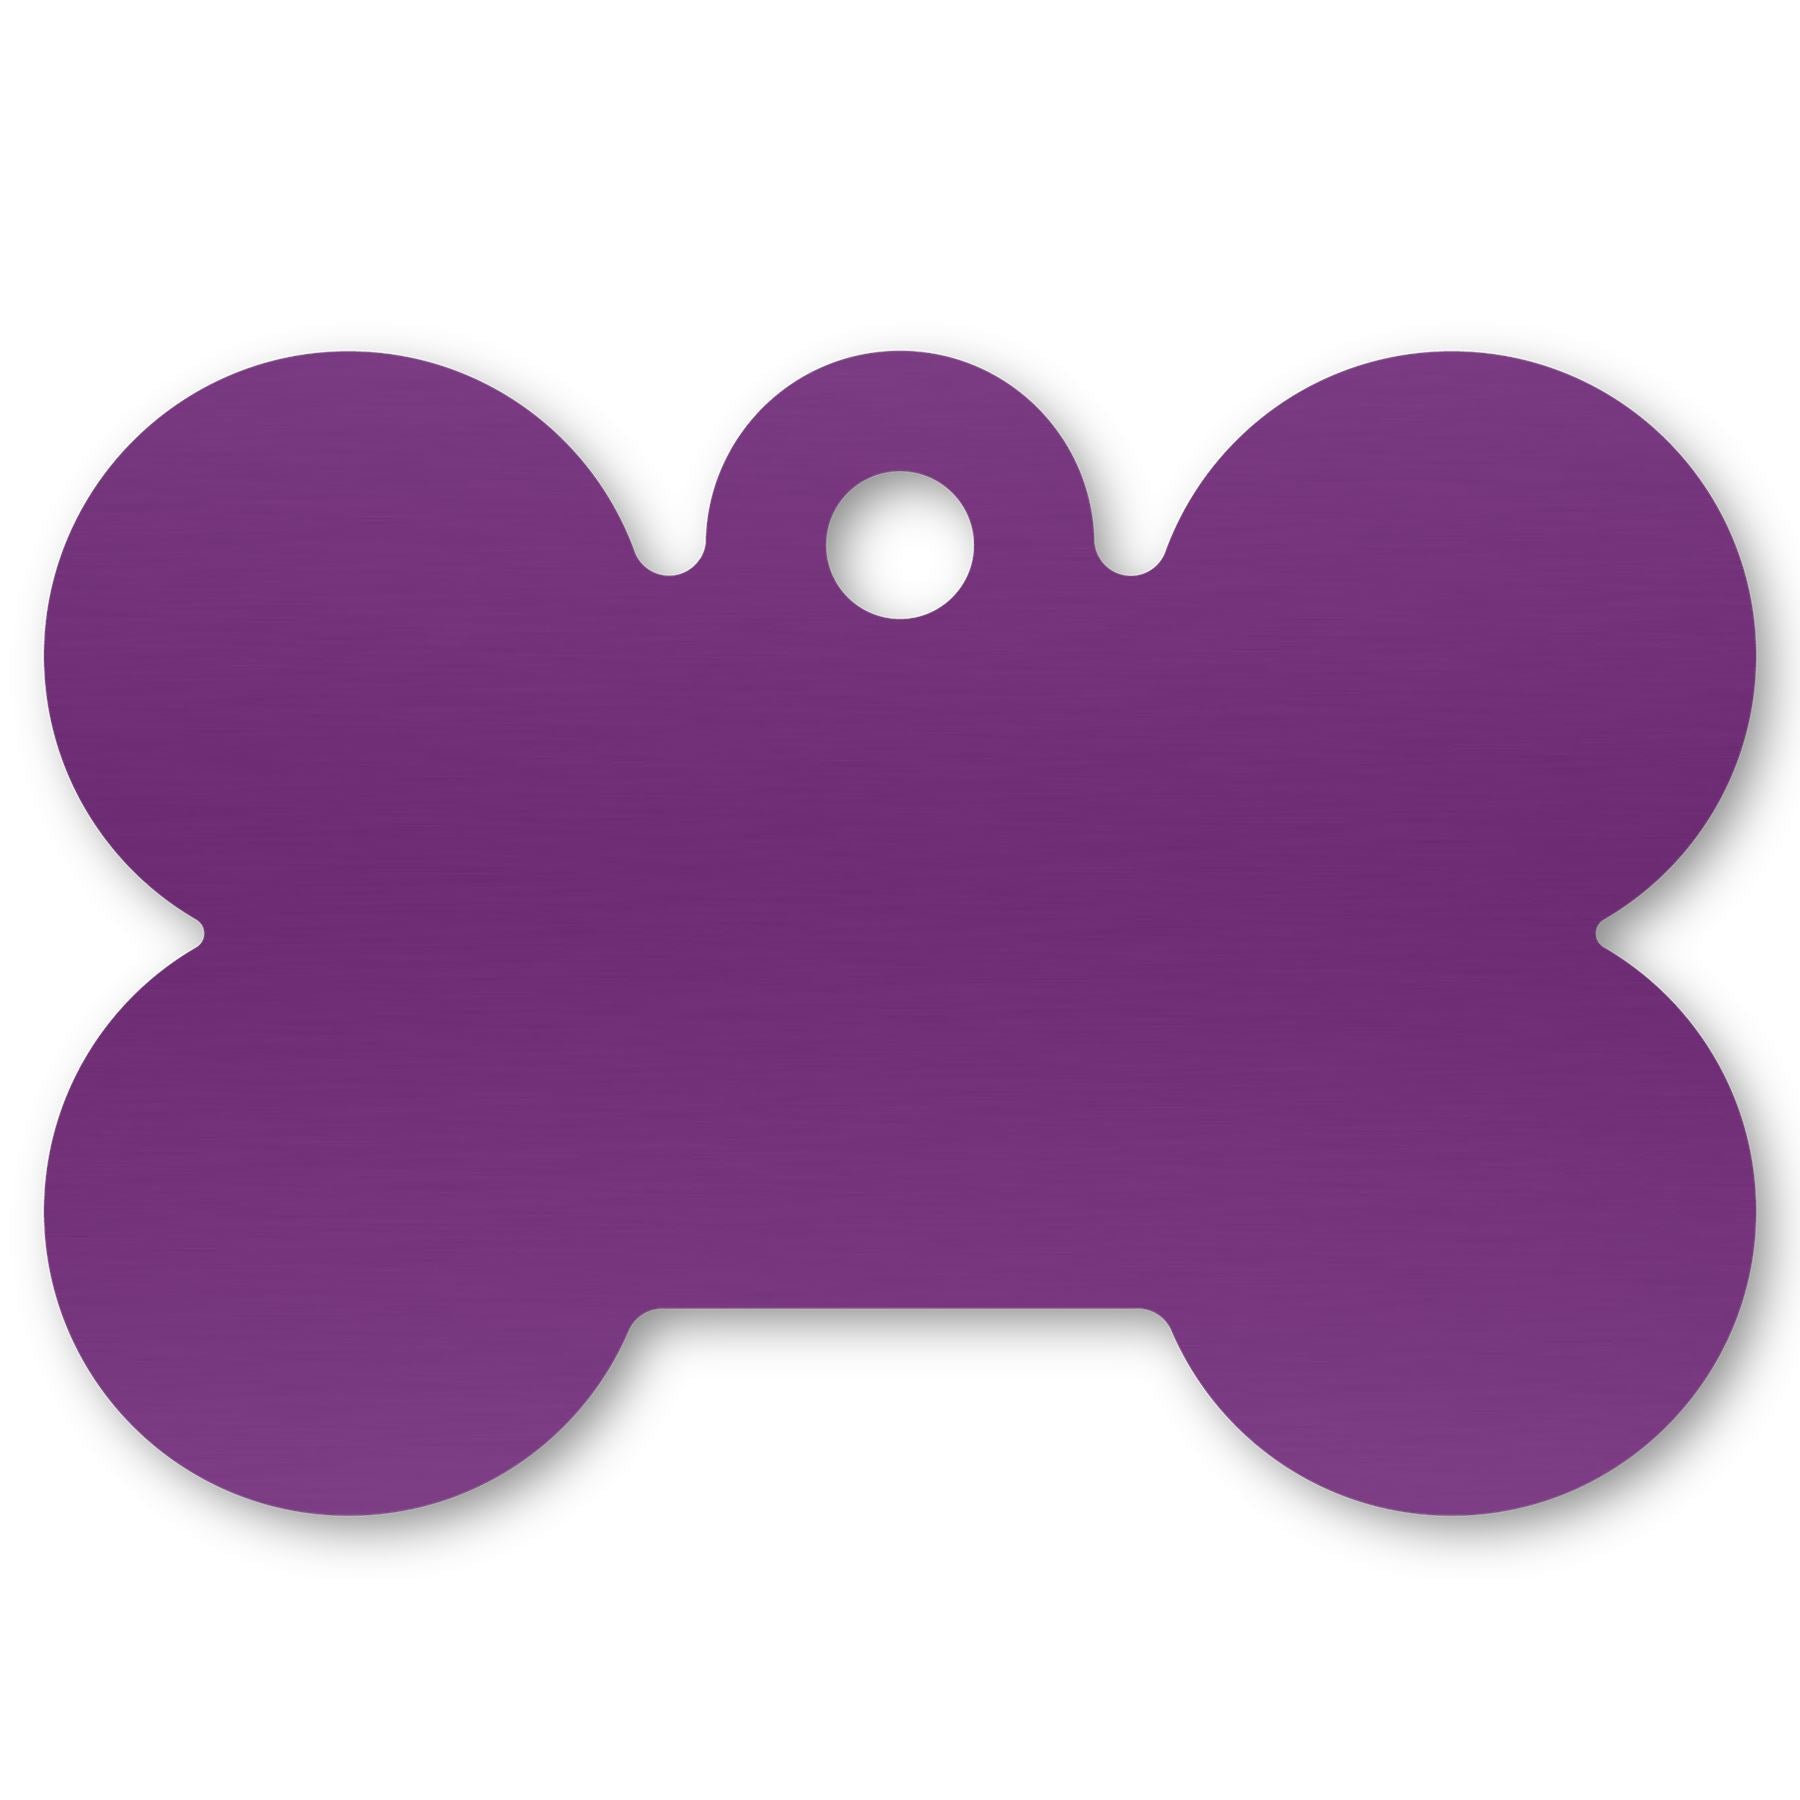 Anodized Aluminum Dog Bone Shaped Tags, 3/4" x 1-1/16" with 3/32" Hole, Laser Engraved Metal Tags Craftworks NW Purple 